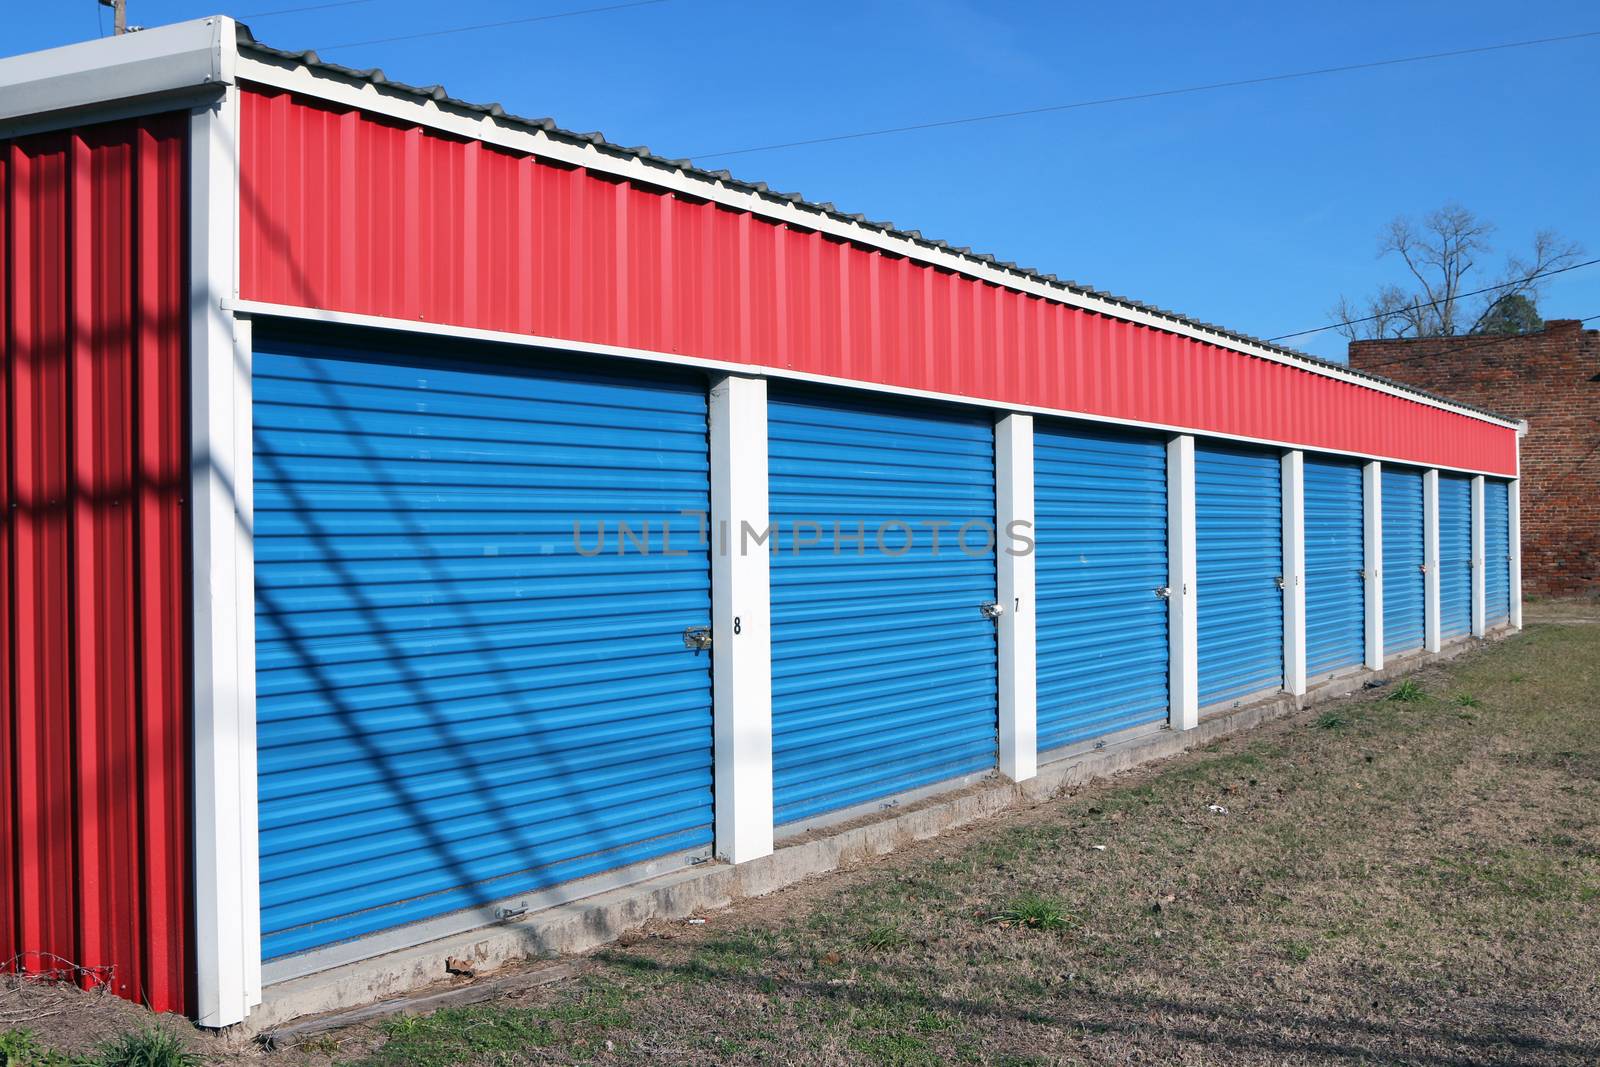 Storage units in a retail lease facility.  Many people use these for temporary storage of household goods.